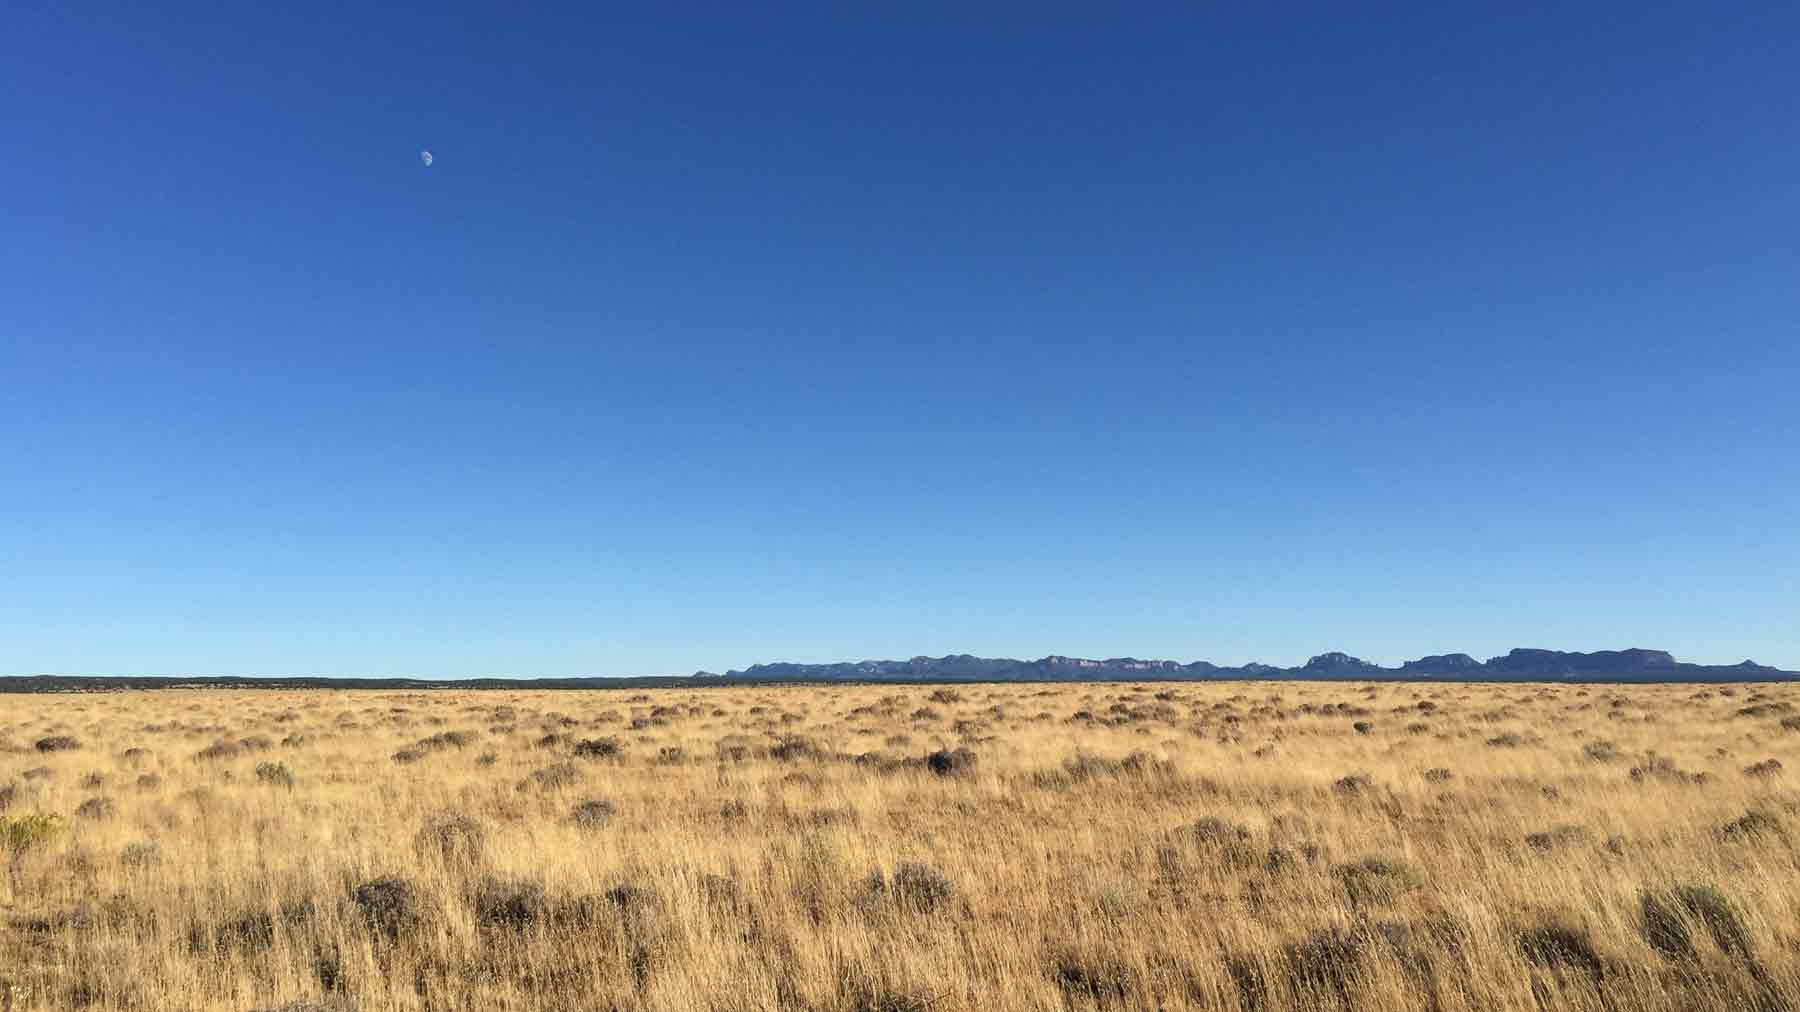 View of a dry grassy field towards distant mountains near the Lightning Field art installation in New Mexico